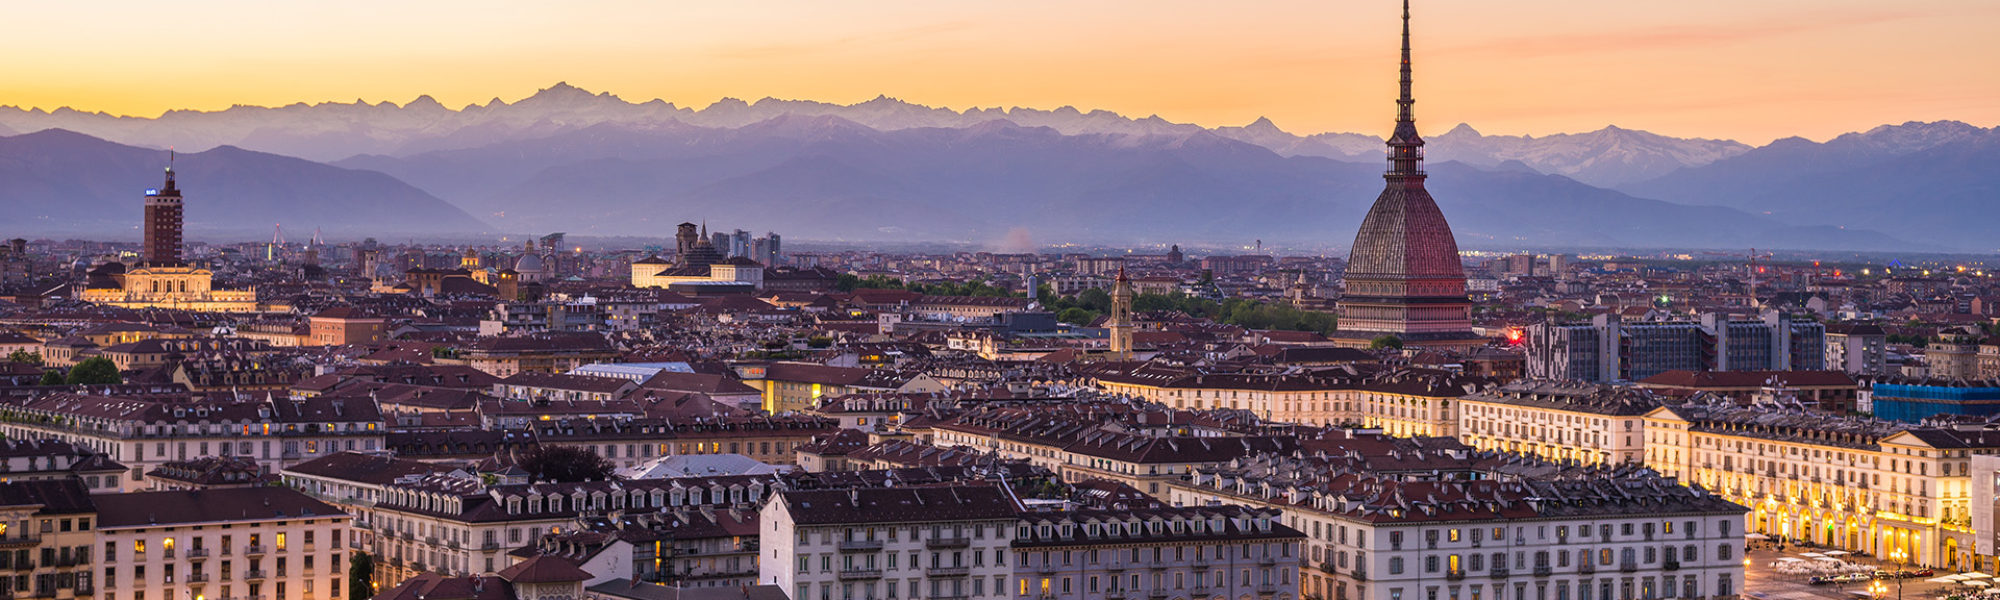 Cityscape of Torino (Turin, Italy) at sunsetwith colorful clear sky. The Mole Antonelliana towering on the city.